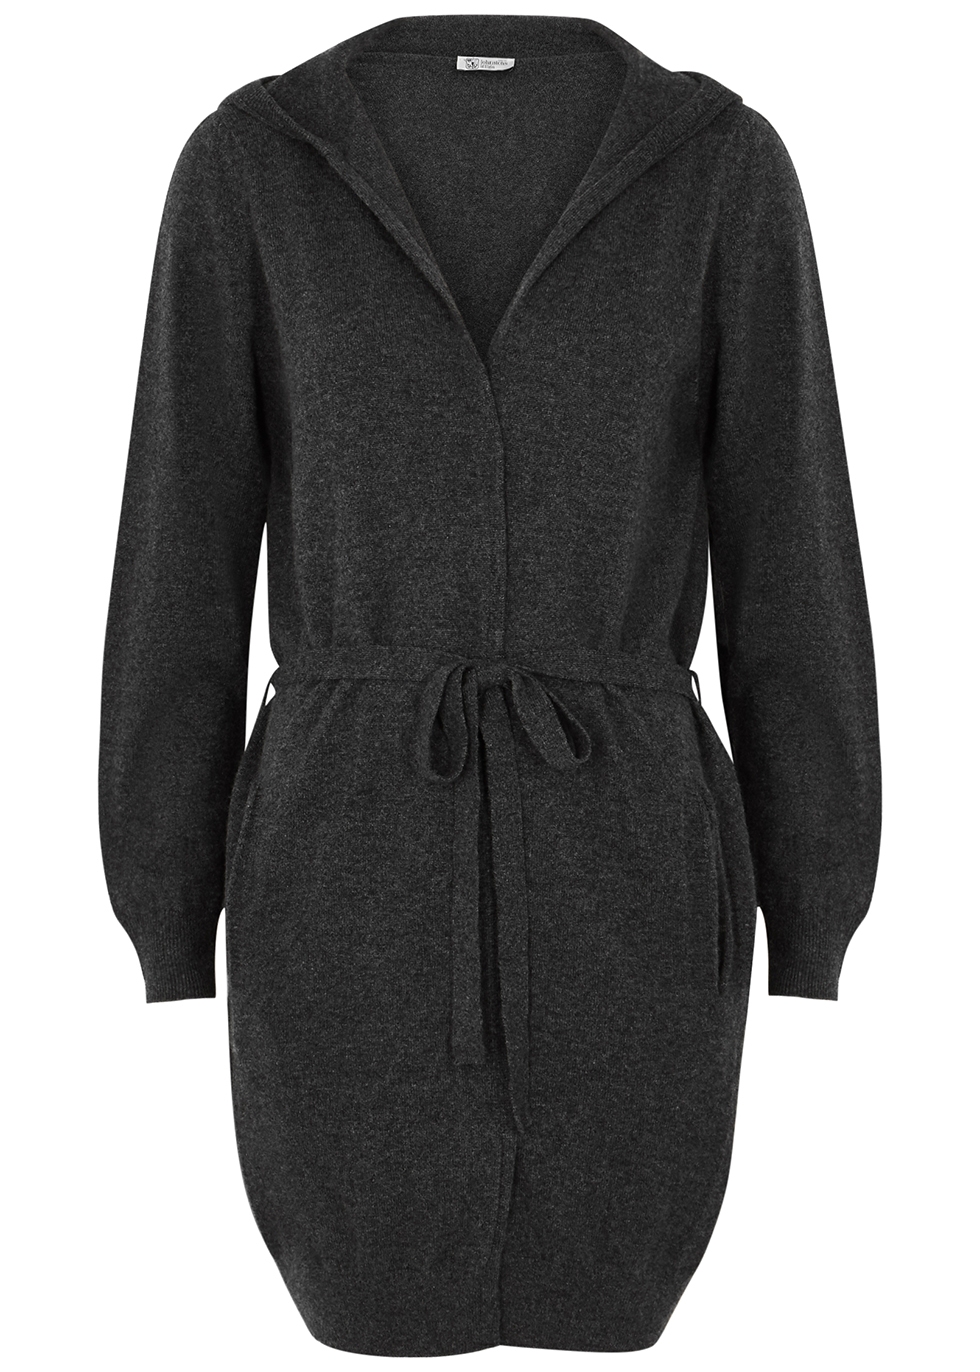 Sale  Johnstons of Elgin Sale ✓ Charcoal hooded cashmere cardigan All the  people sale & clearance at johnstonselgin.shop